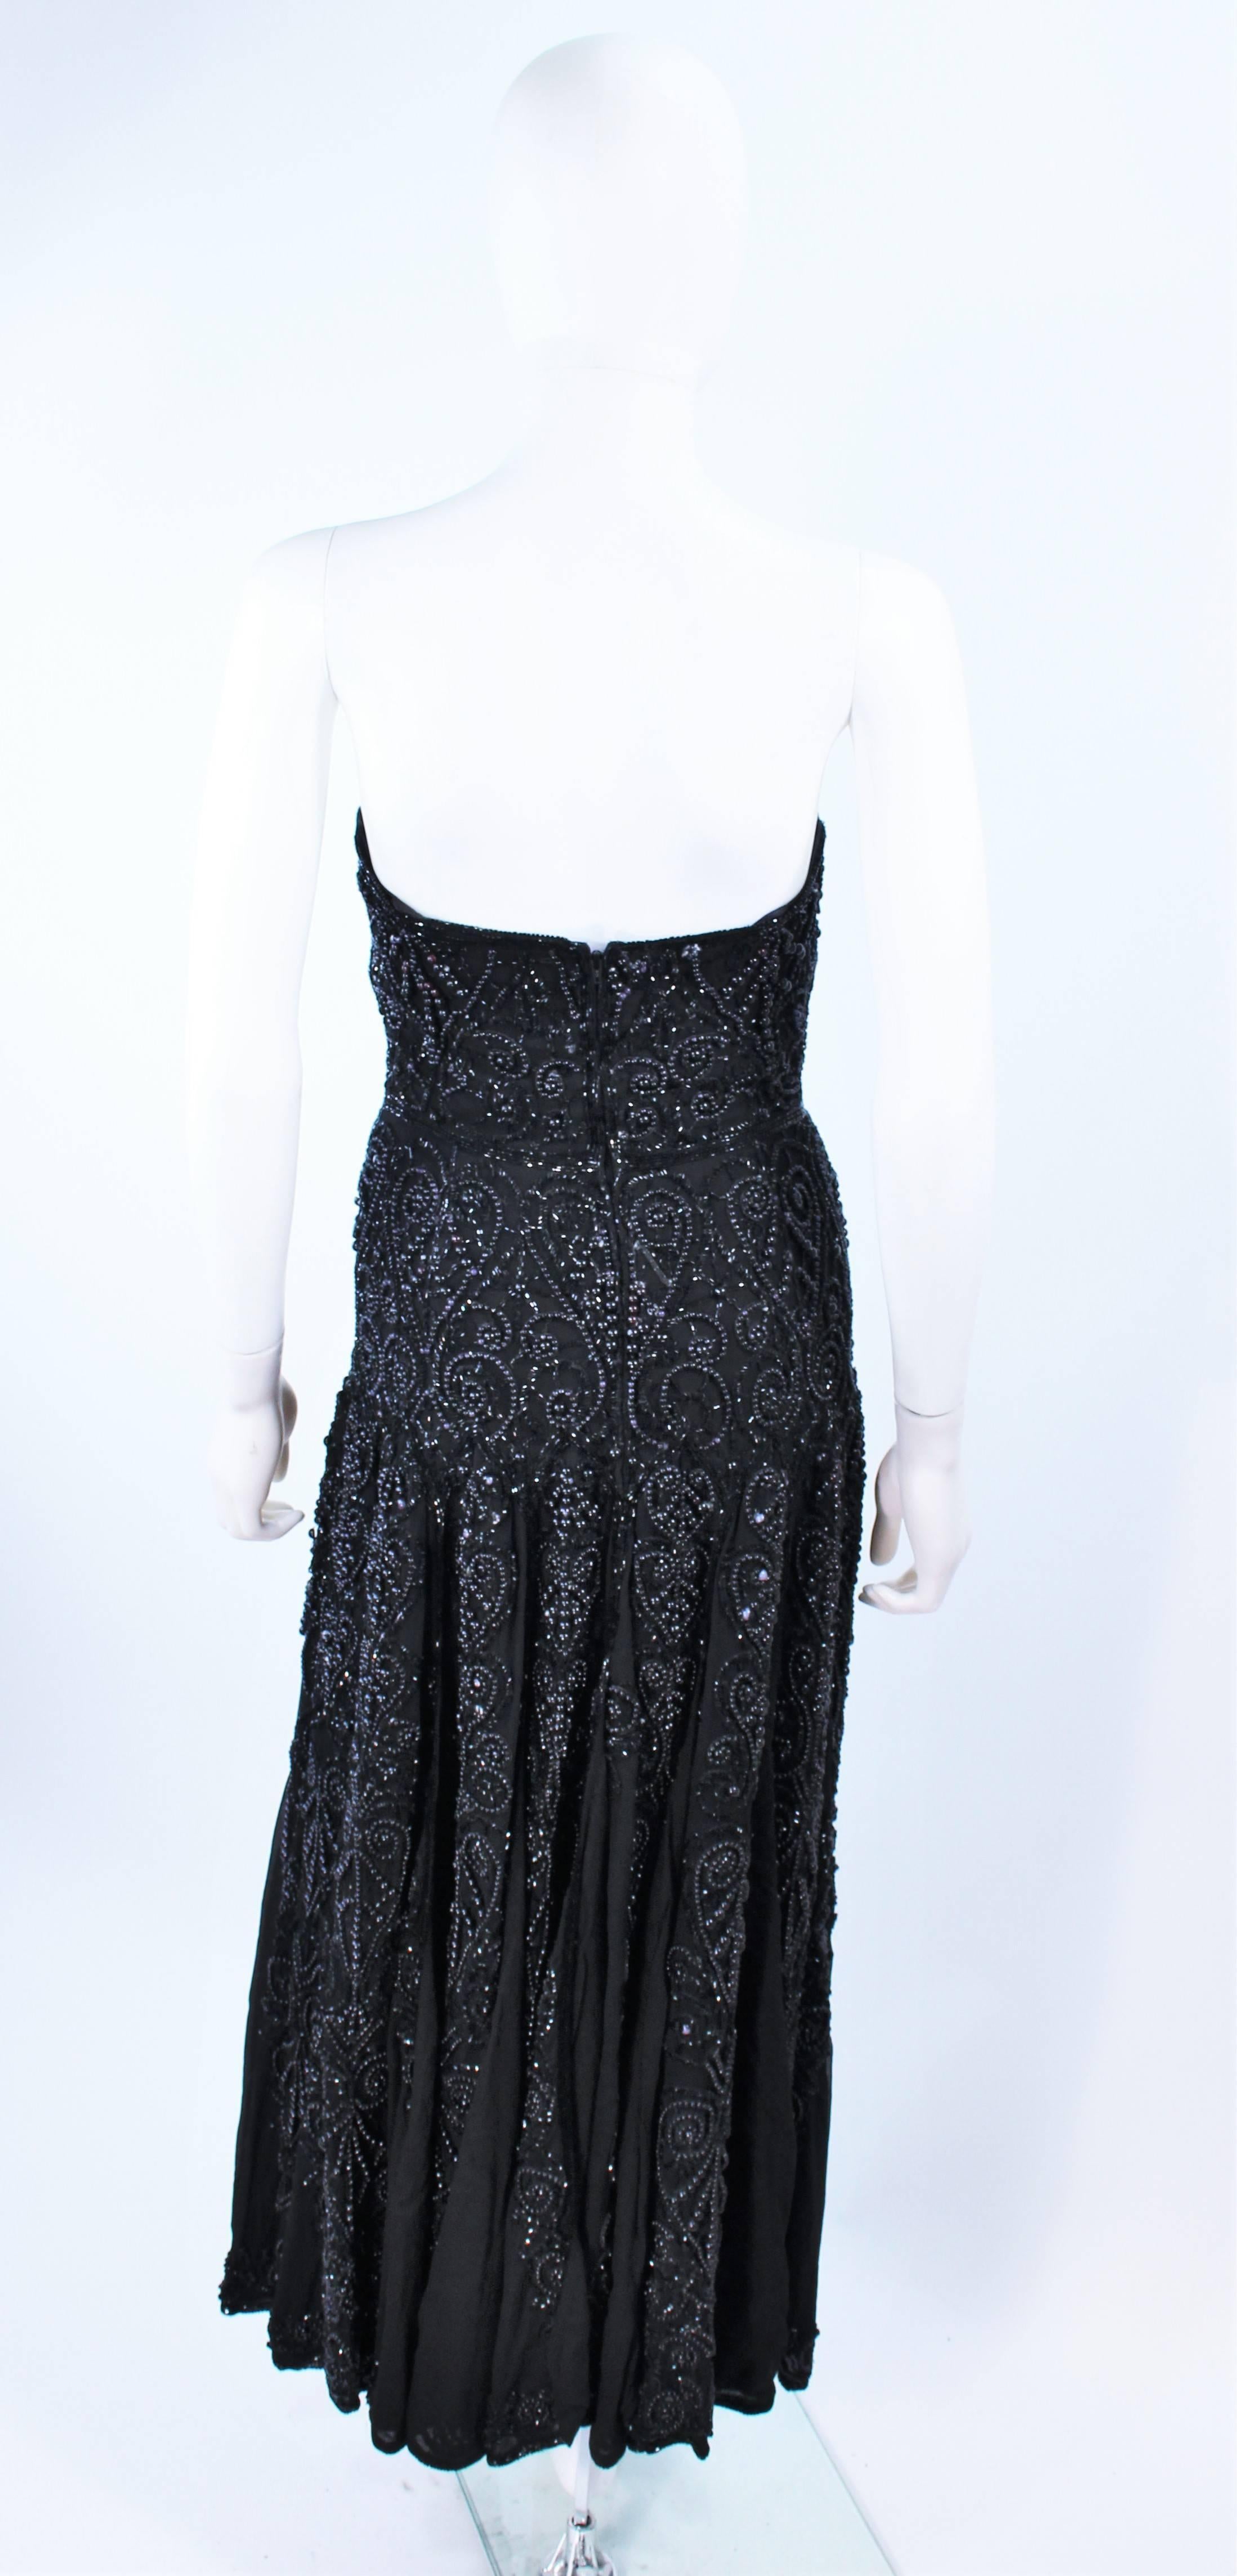 EAVIS & BROWN Black Velvet Heavily Beaded Strapless Gown with Chiffon Size 2 4 For Sale 3